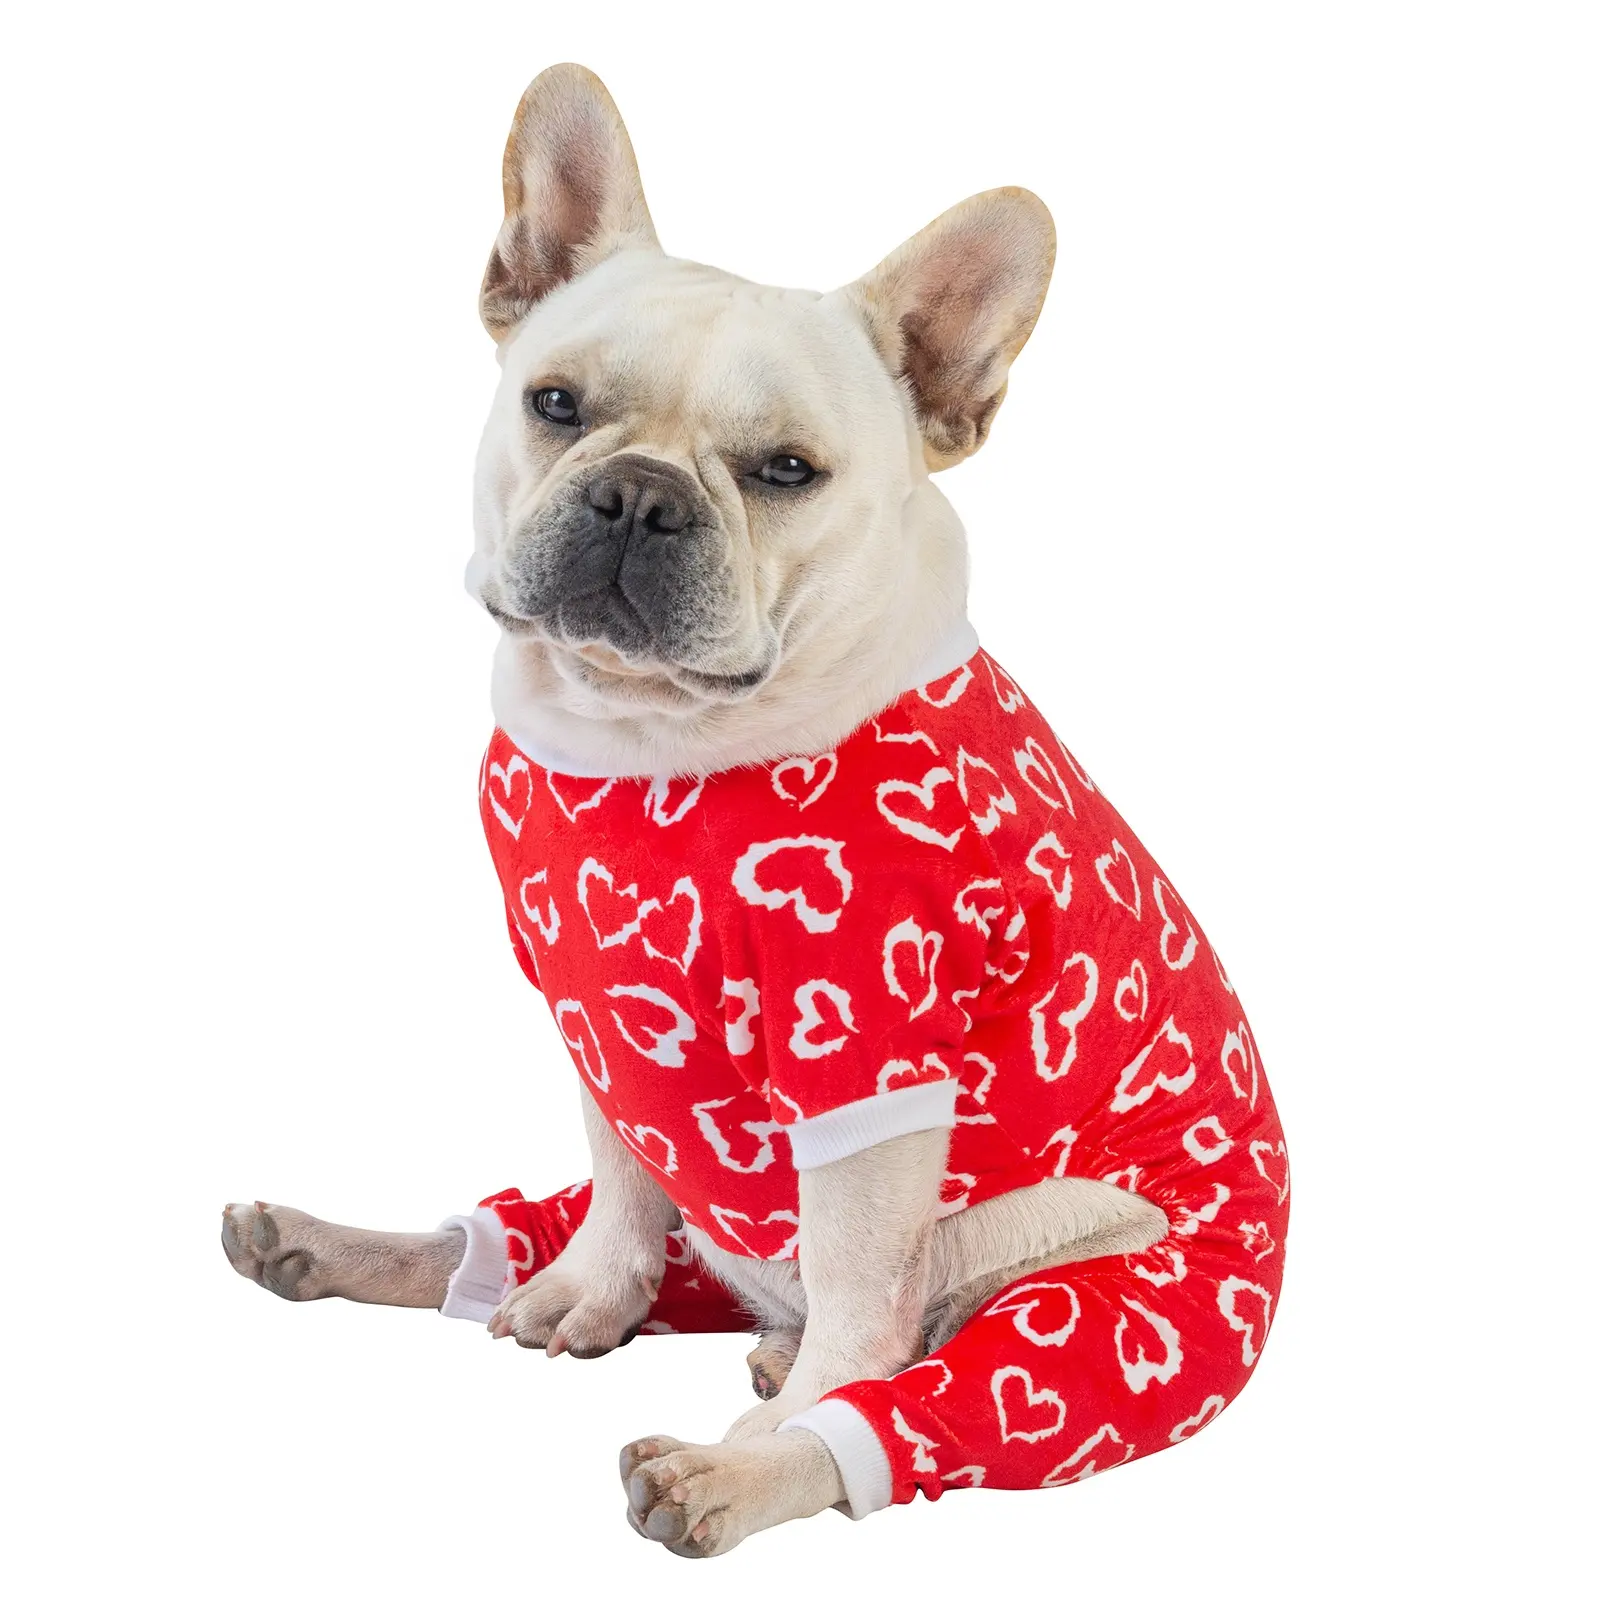 CuteBone Soft Fleece Dog Pajamas Pet Clothes Cute Red Hearts Clothes For Puppy Warm Dog Jackets